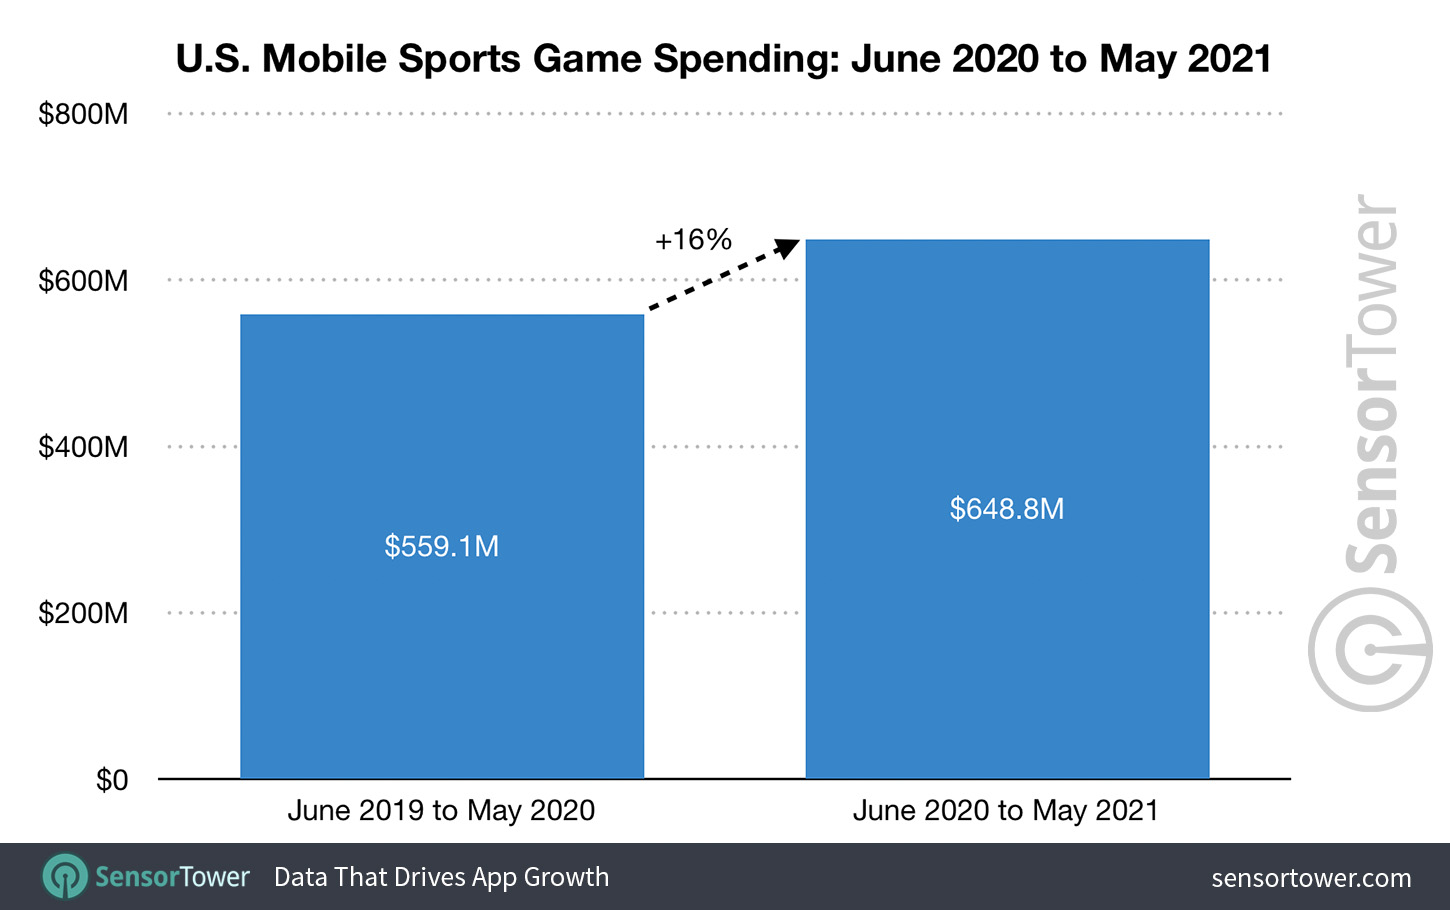 U.S. Mobile Sports Game Spending: June 1, 2020 and May 31, 2021